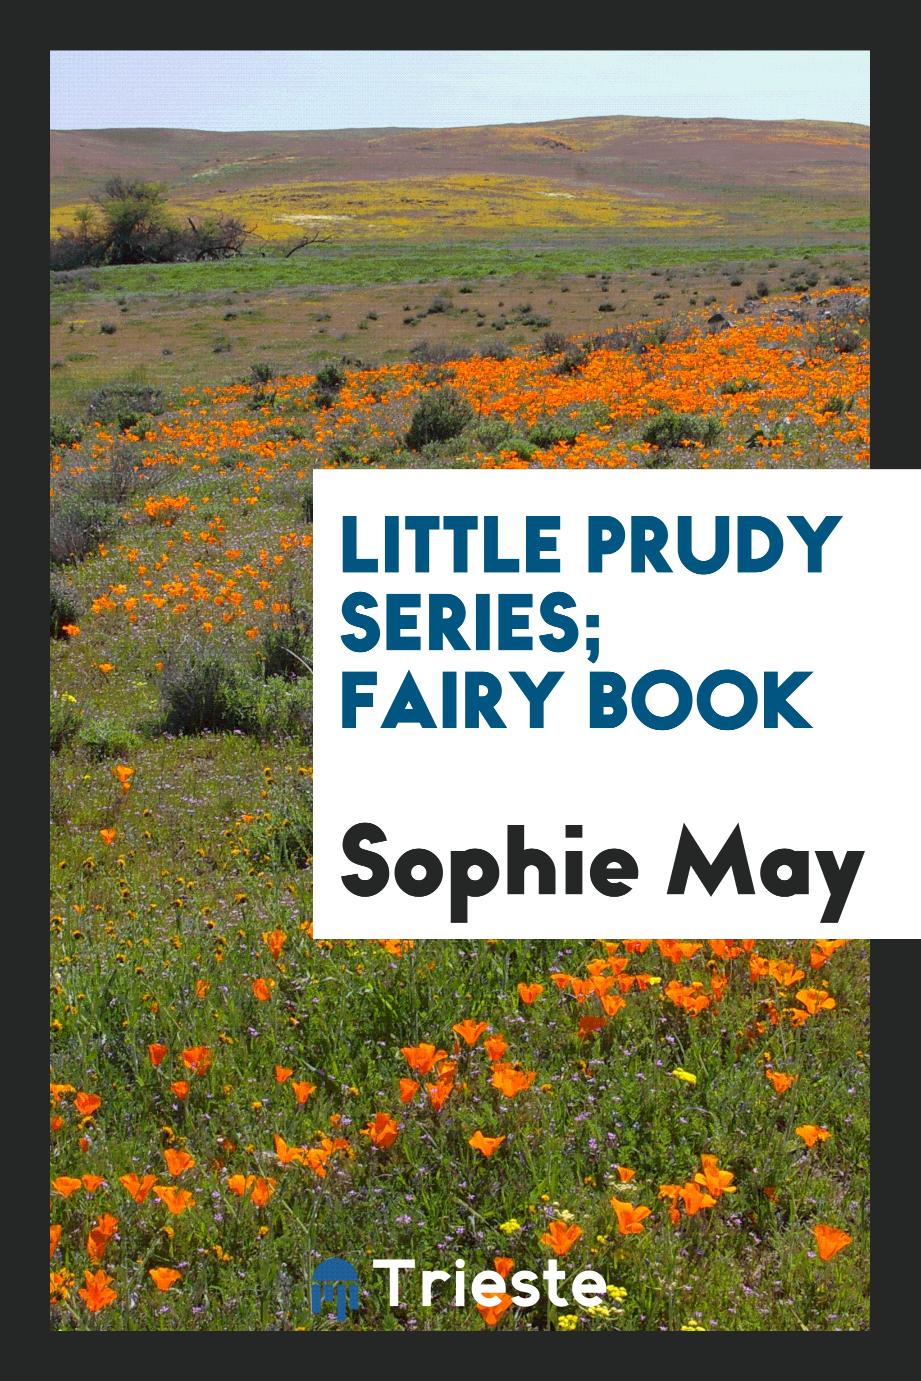 Little prudy series; Fairy book